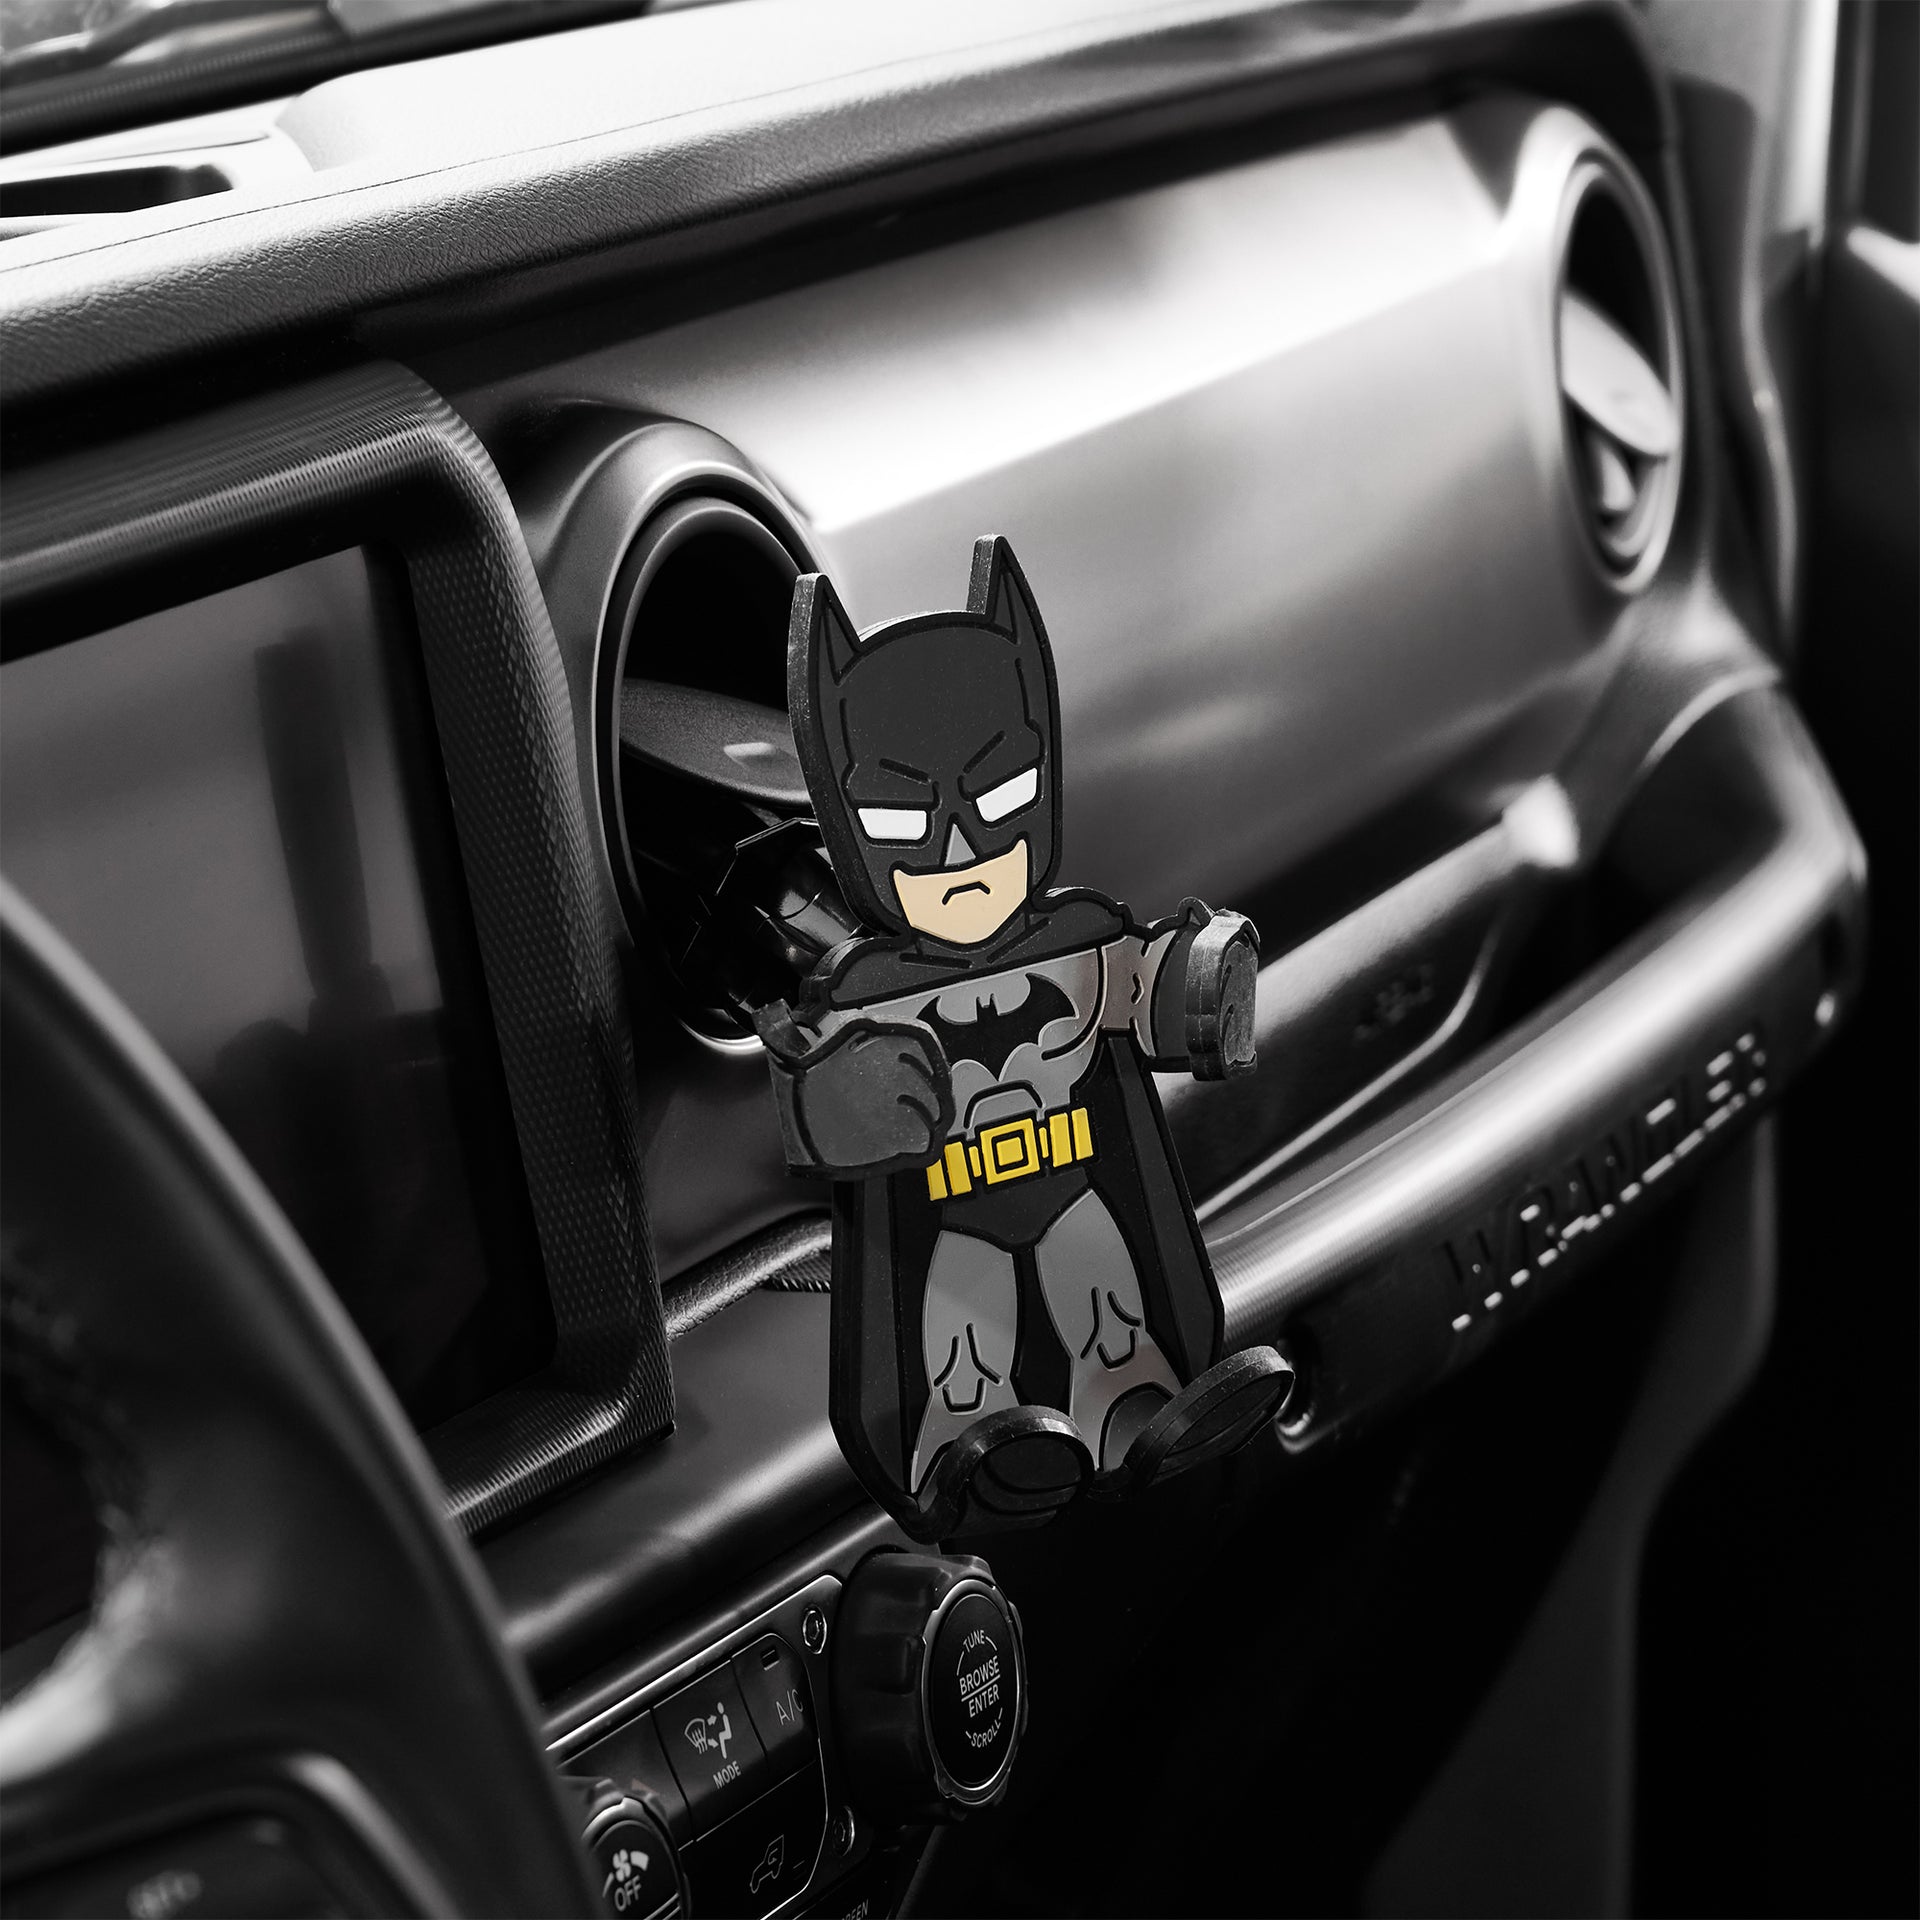 Image of Batman Hug Buddy attached to a car air vent, waiting for your phone or smart device.